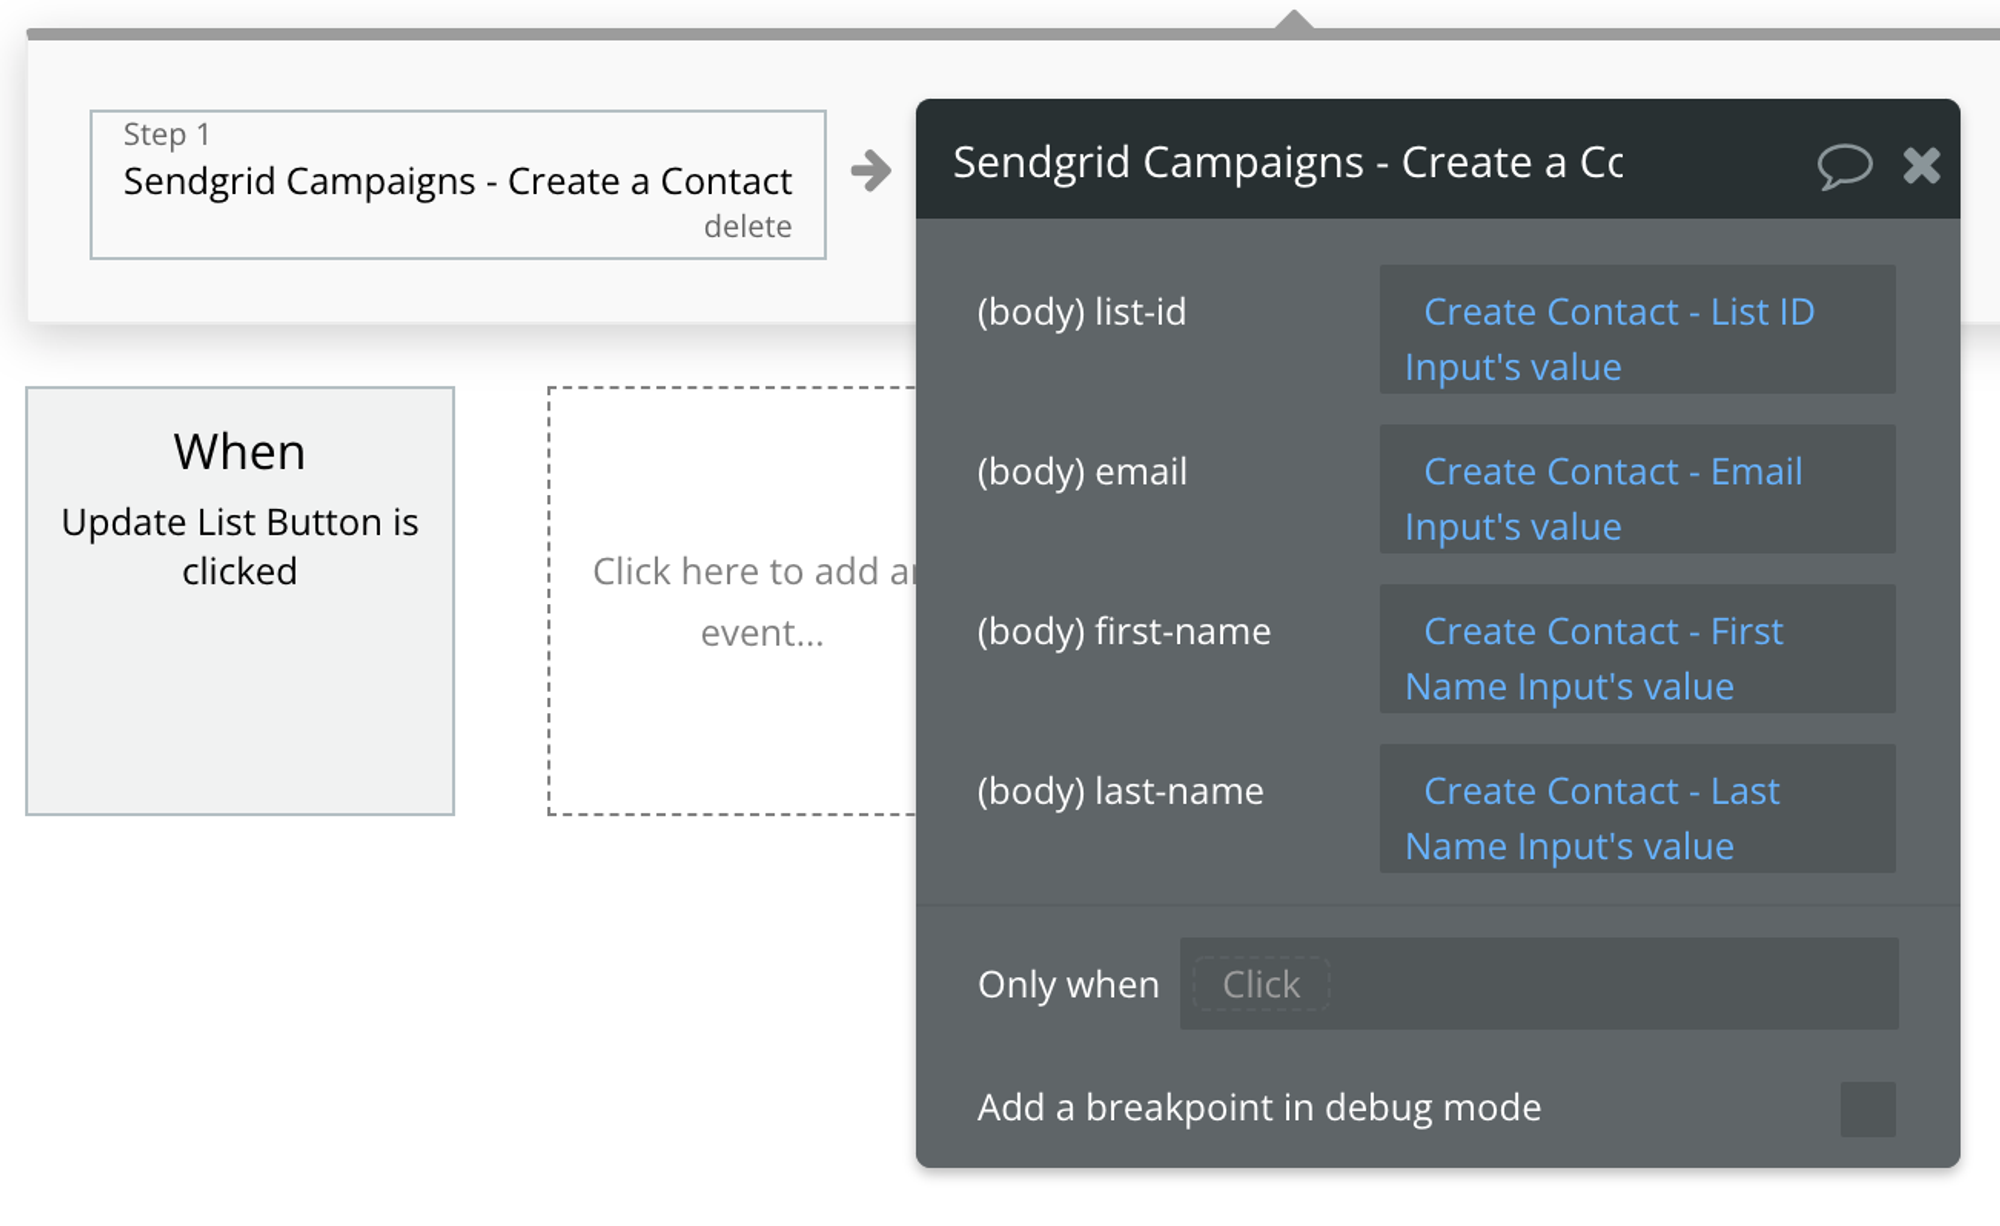 Select Sendgrid Campaigns - Create Contact from the list of Plugin actions